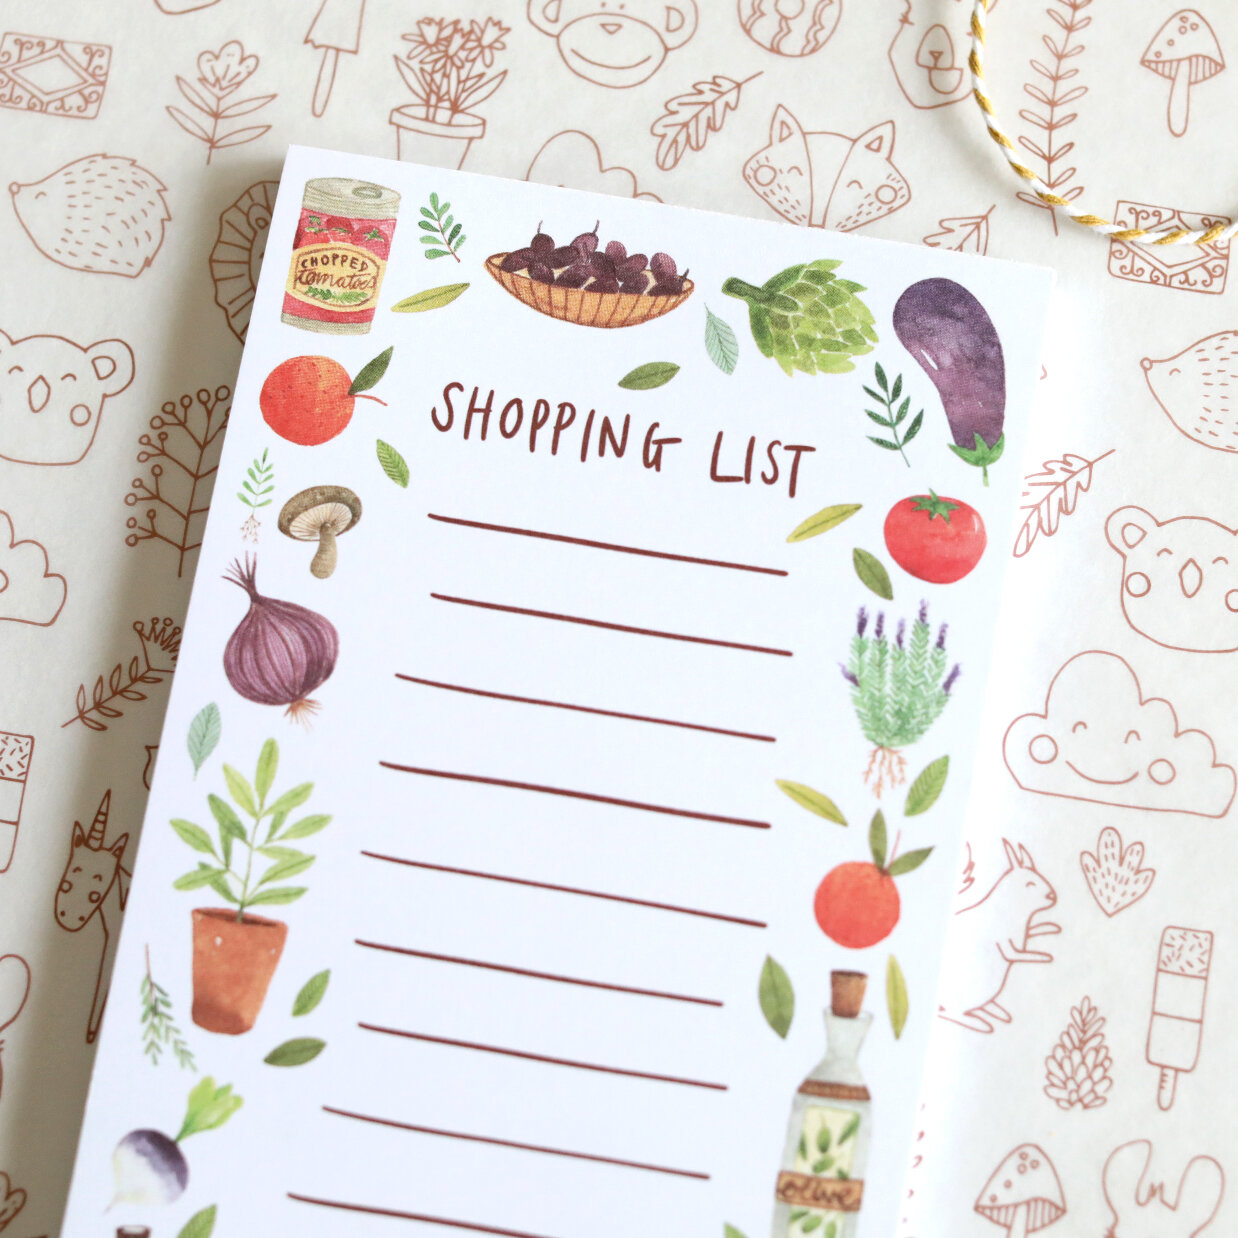 PPaPPaPPiYo Yellow Cat To Do List Notepad Grocery Shopping List 3.1x4.2 Inches 